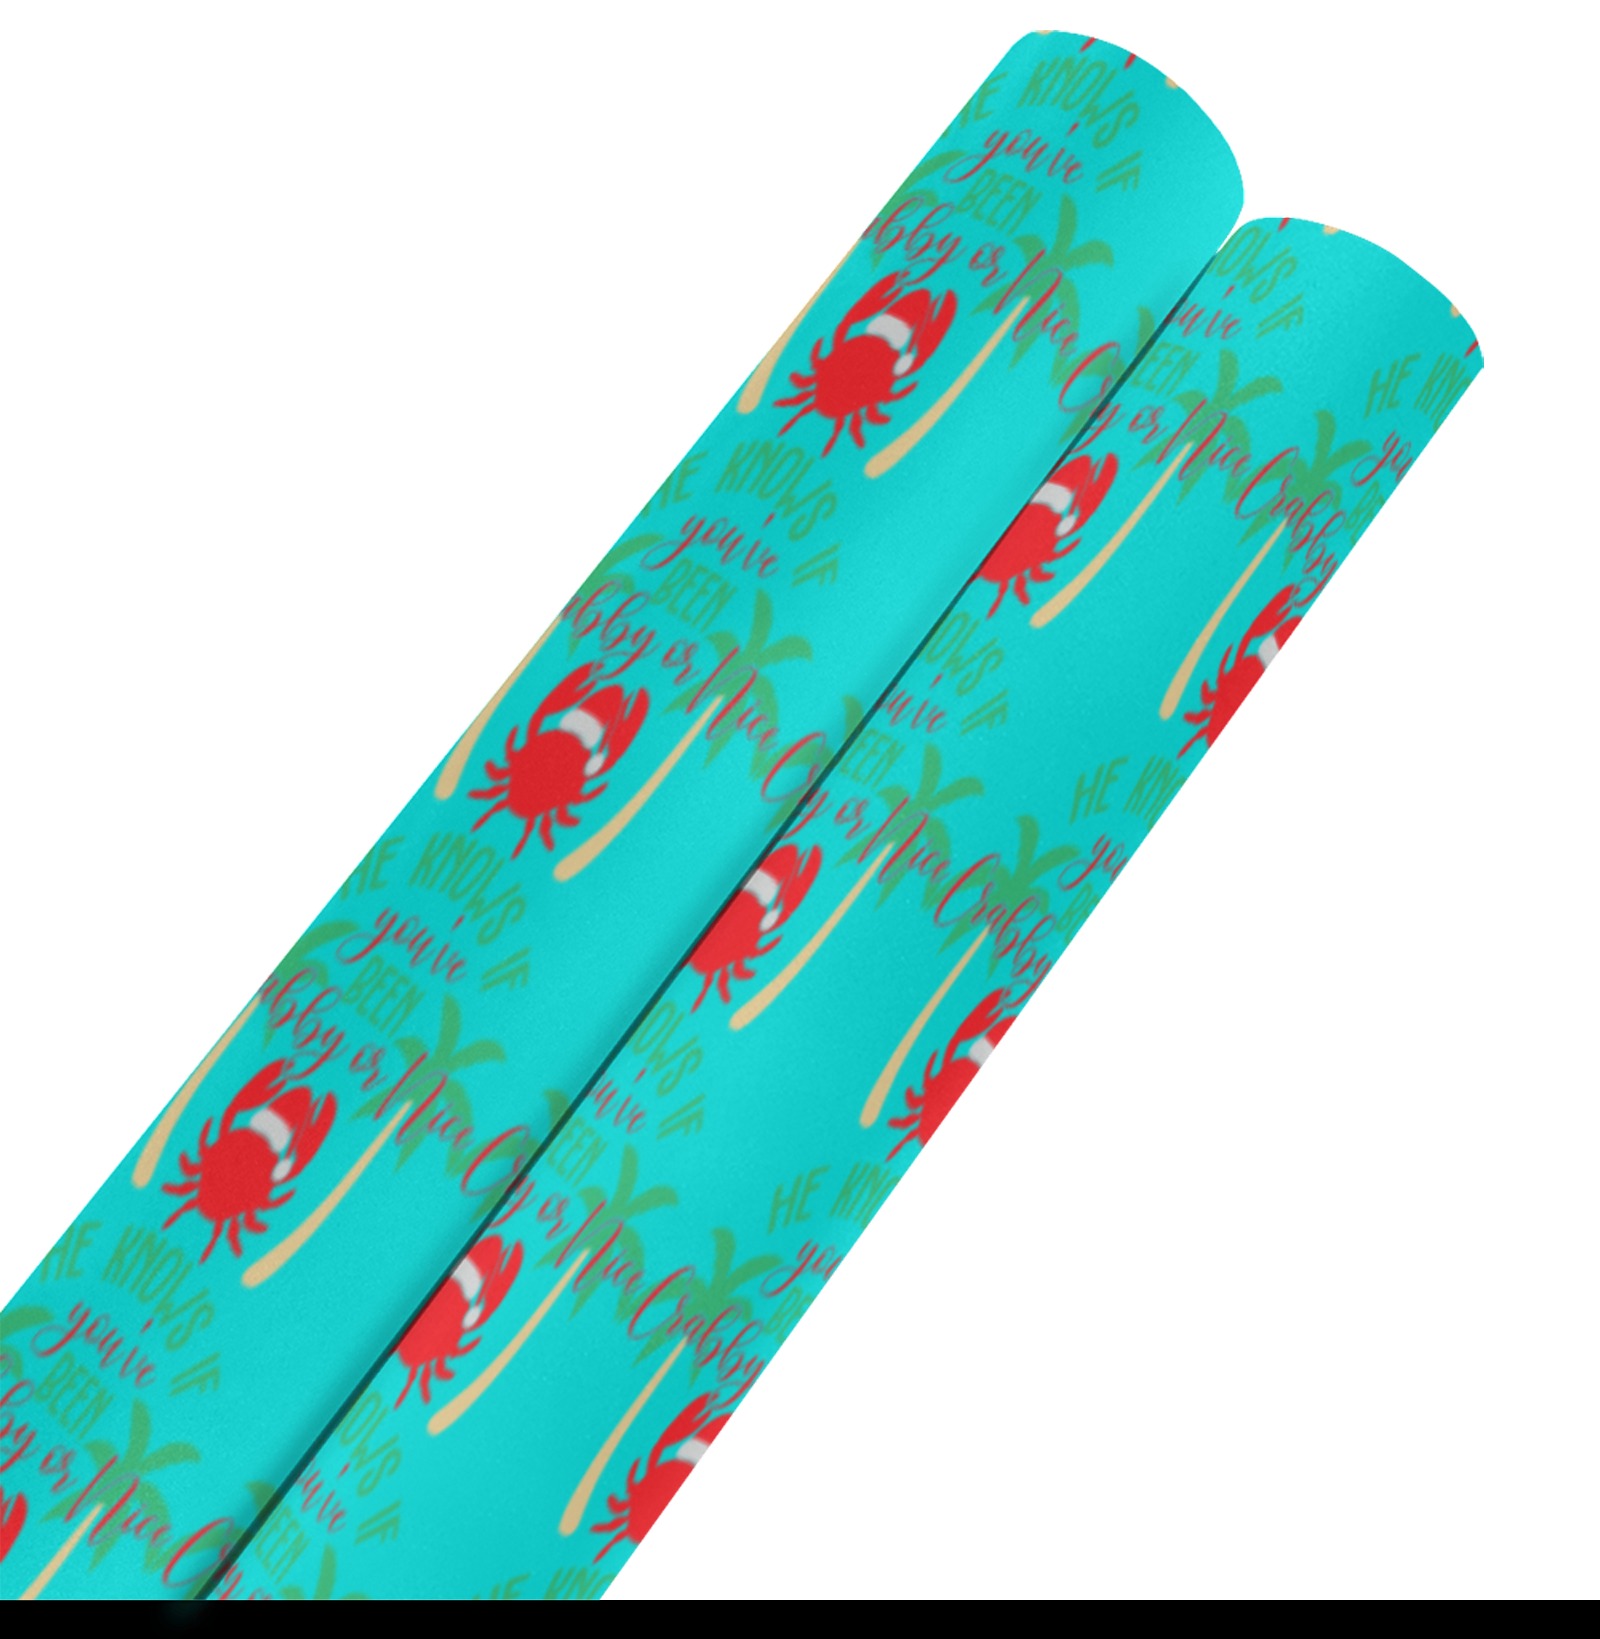 He Knows If You've Been Crabby or Nice Gift Wrapping Paper 58"x 23" (2 Rolls)